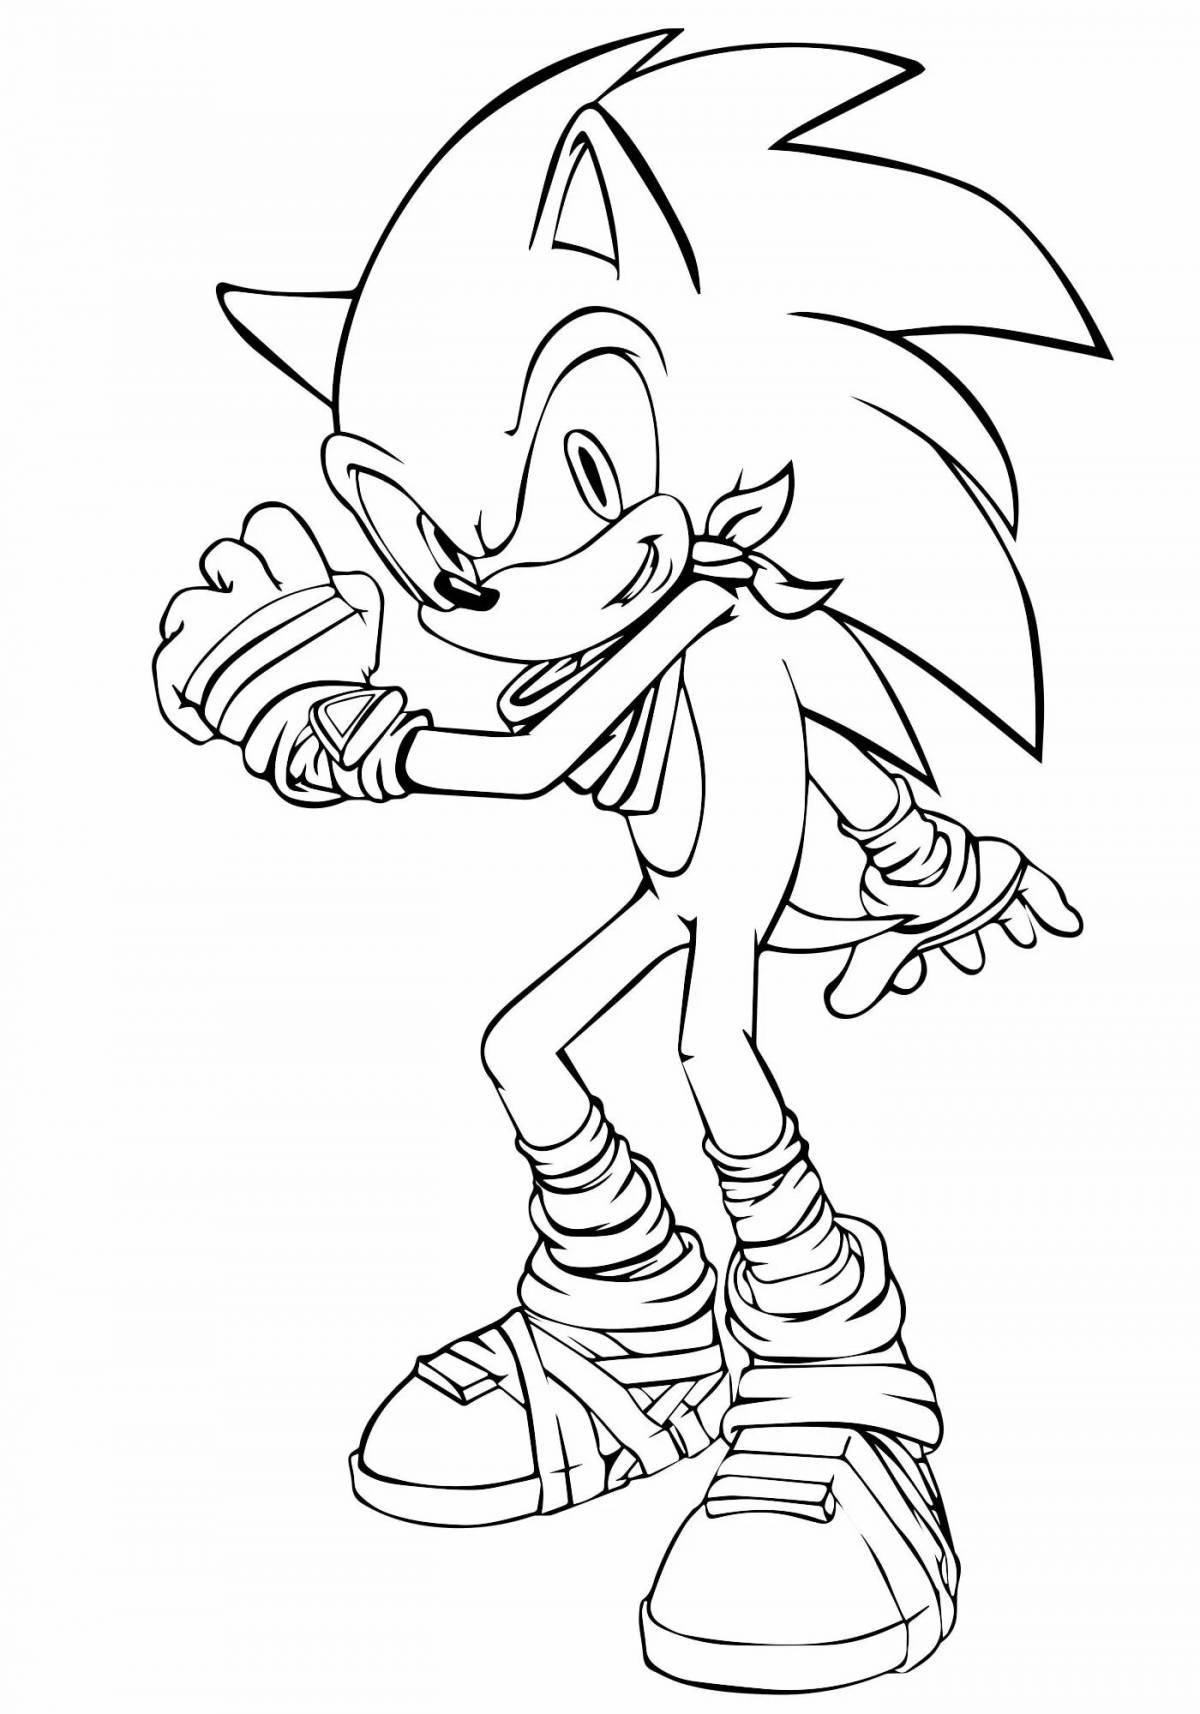 Dazzling darkspine sonic coloring page